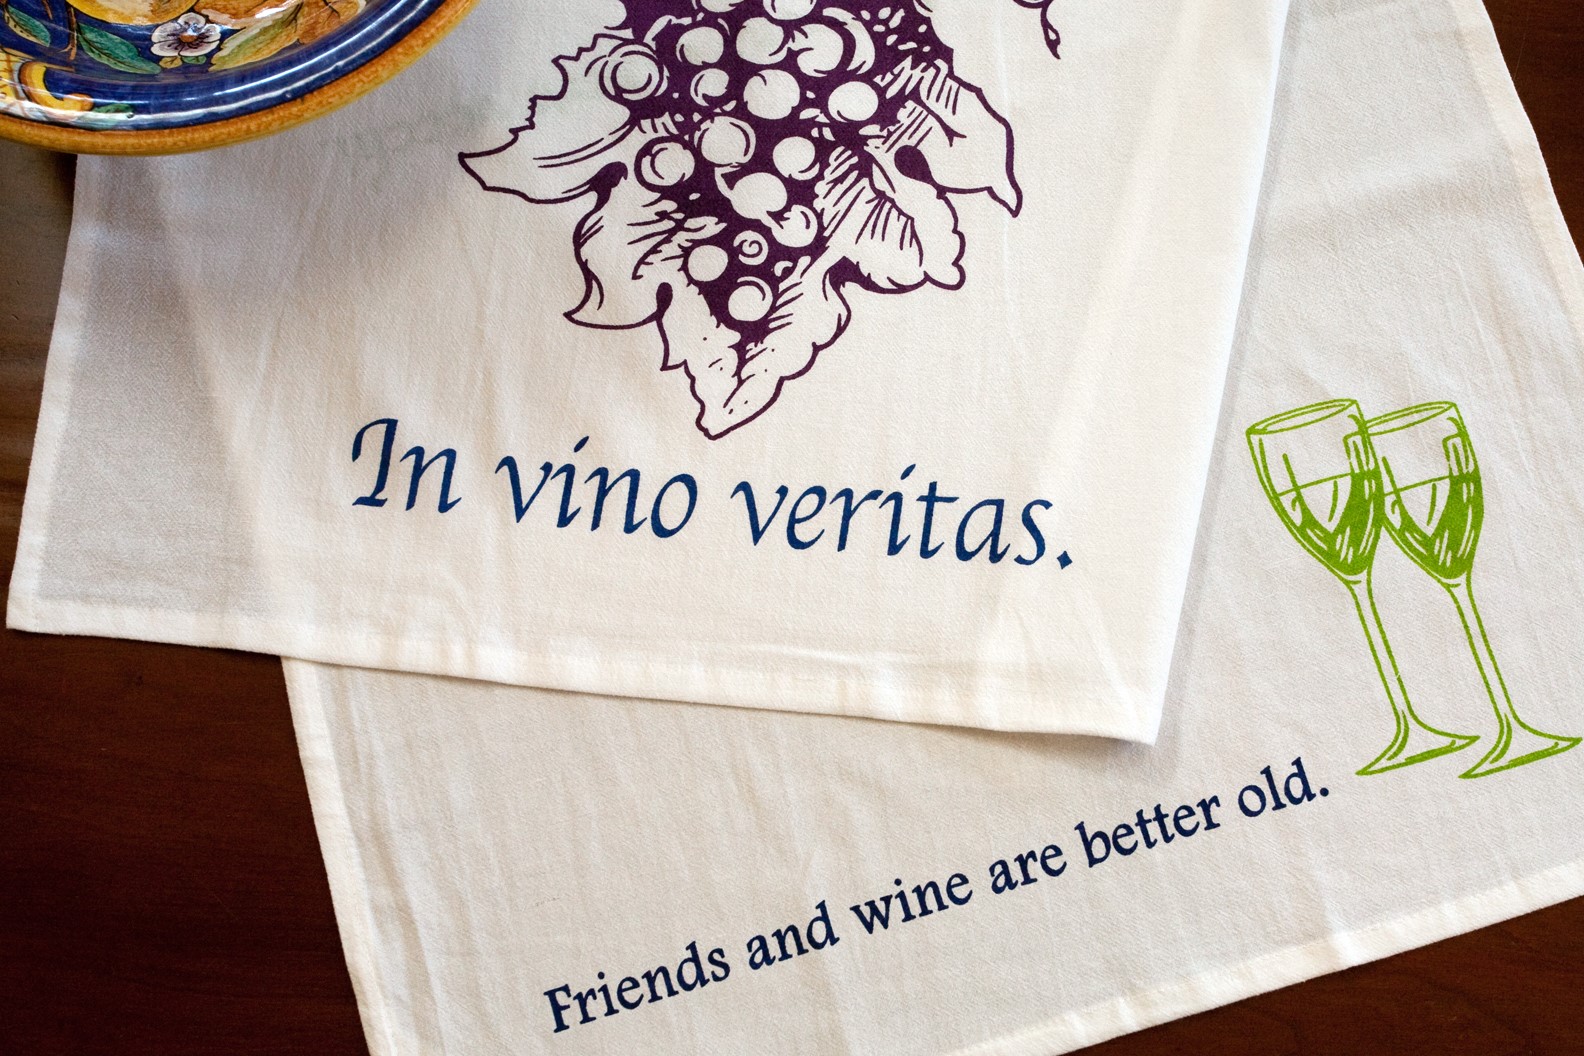 In Vino - In wine, there is truth!